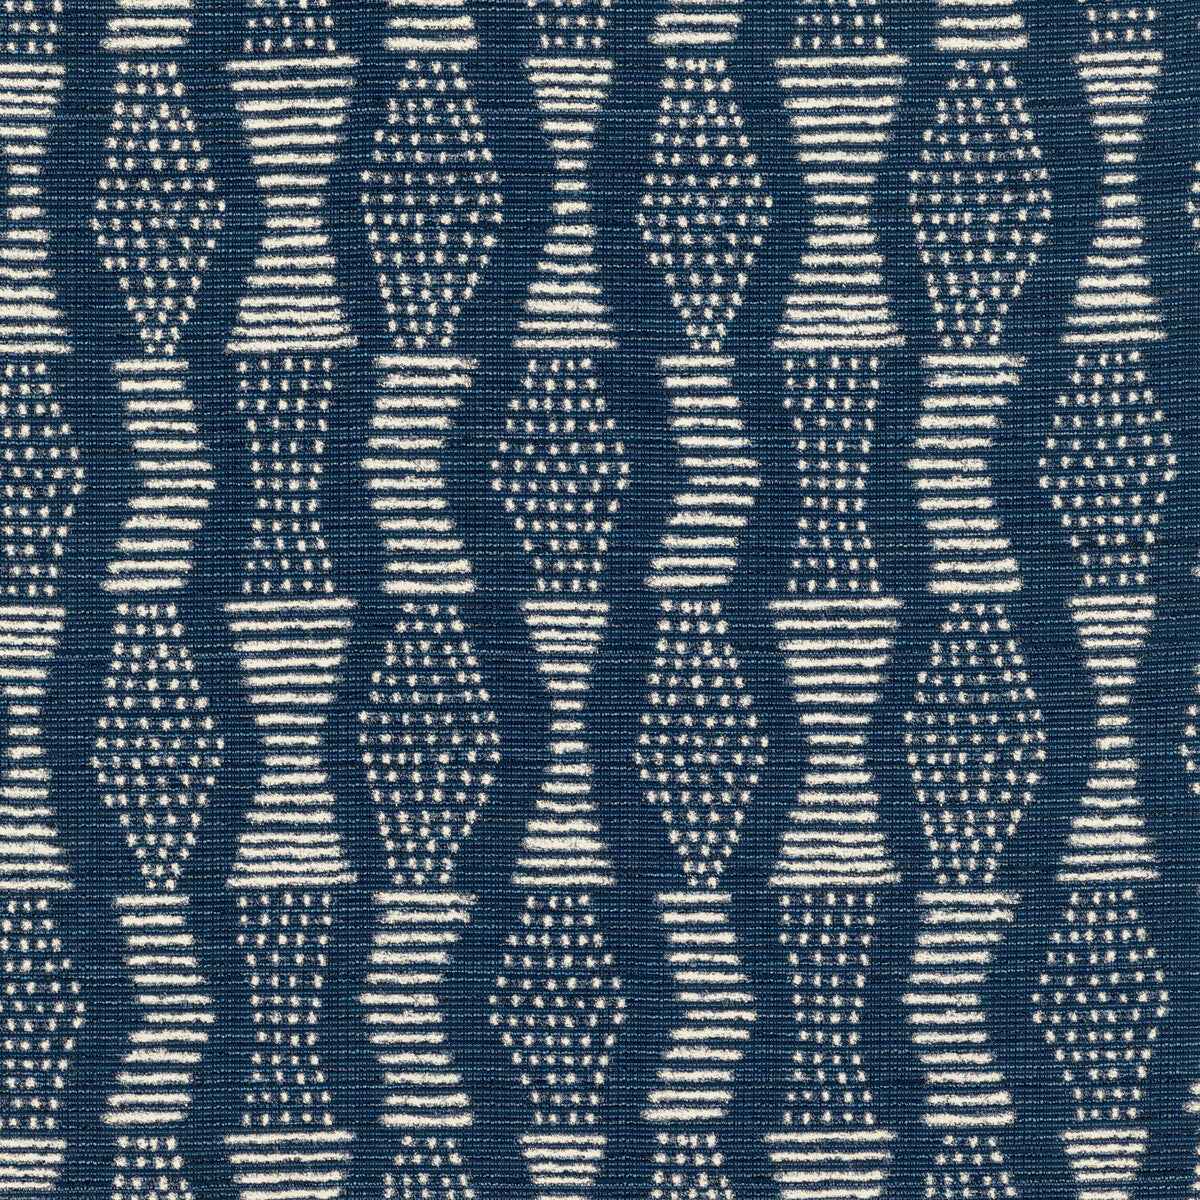 Kravet Design fabric in 36272-50 color - pattern 36272.50.0 - by Kravet Design in the Woven Colors collection